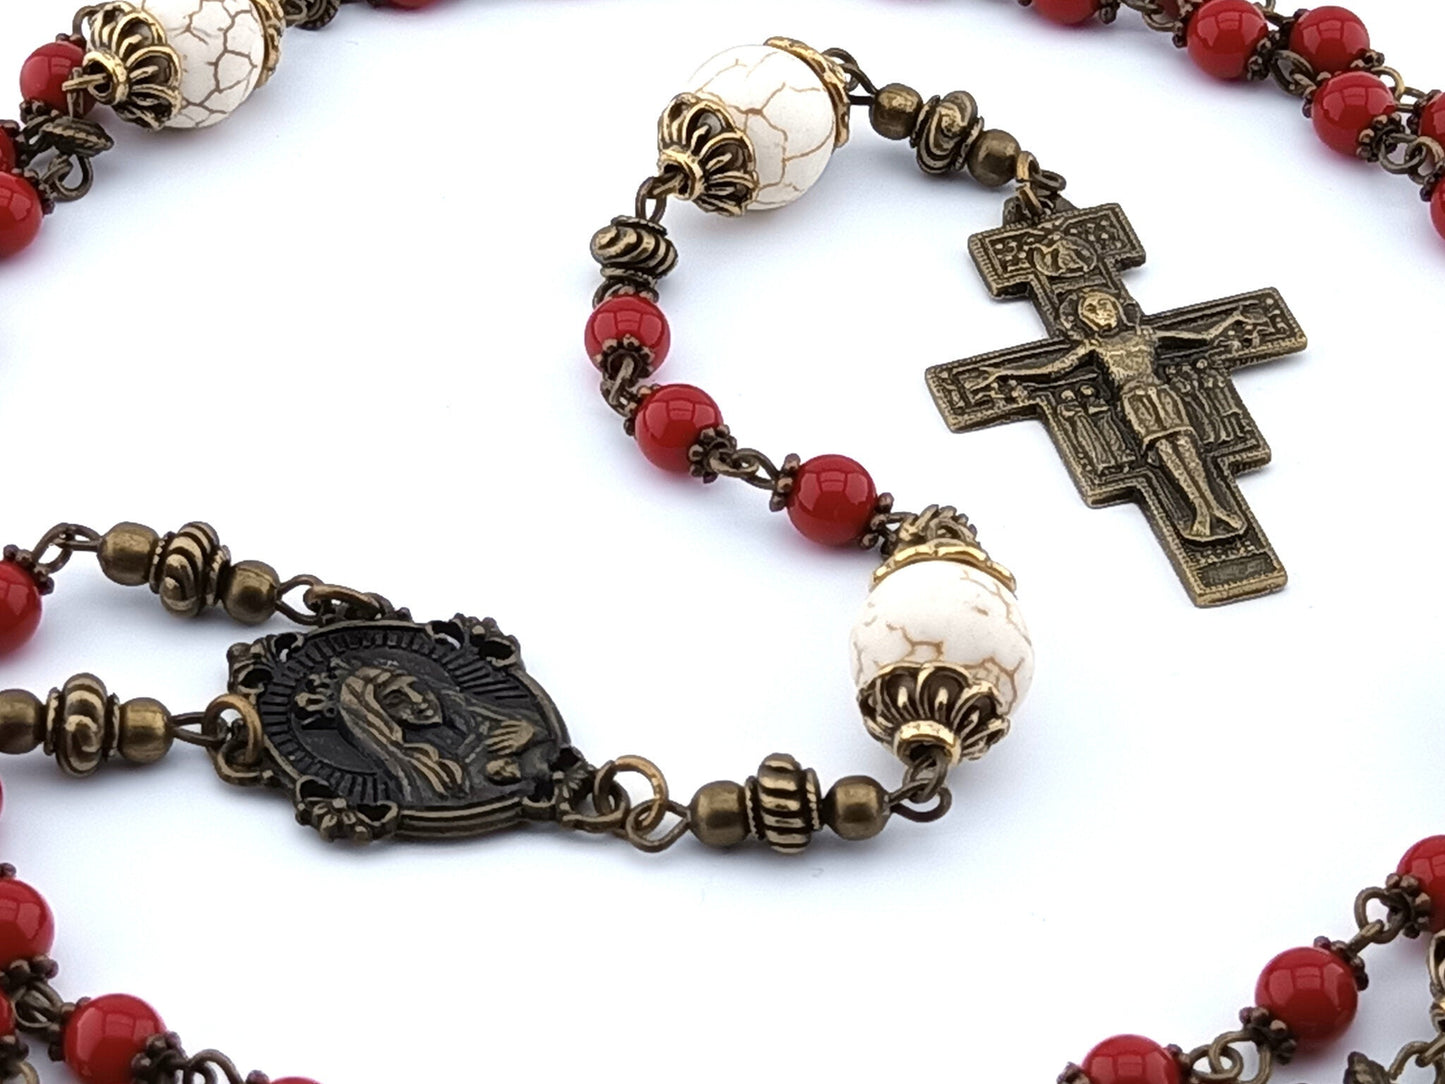 Immaculate Heart of Mary unique rosary beads with red glass beads, gemstone pater beads, bronze Saint Francis of Assisi crucifix and Our Lady centre medal.